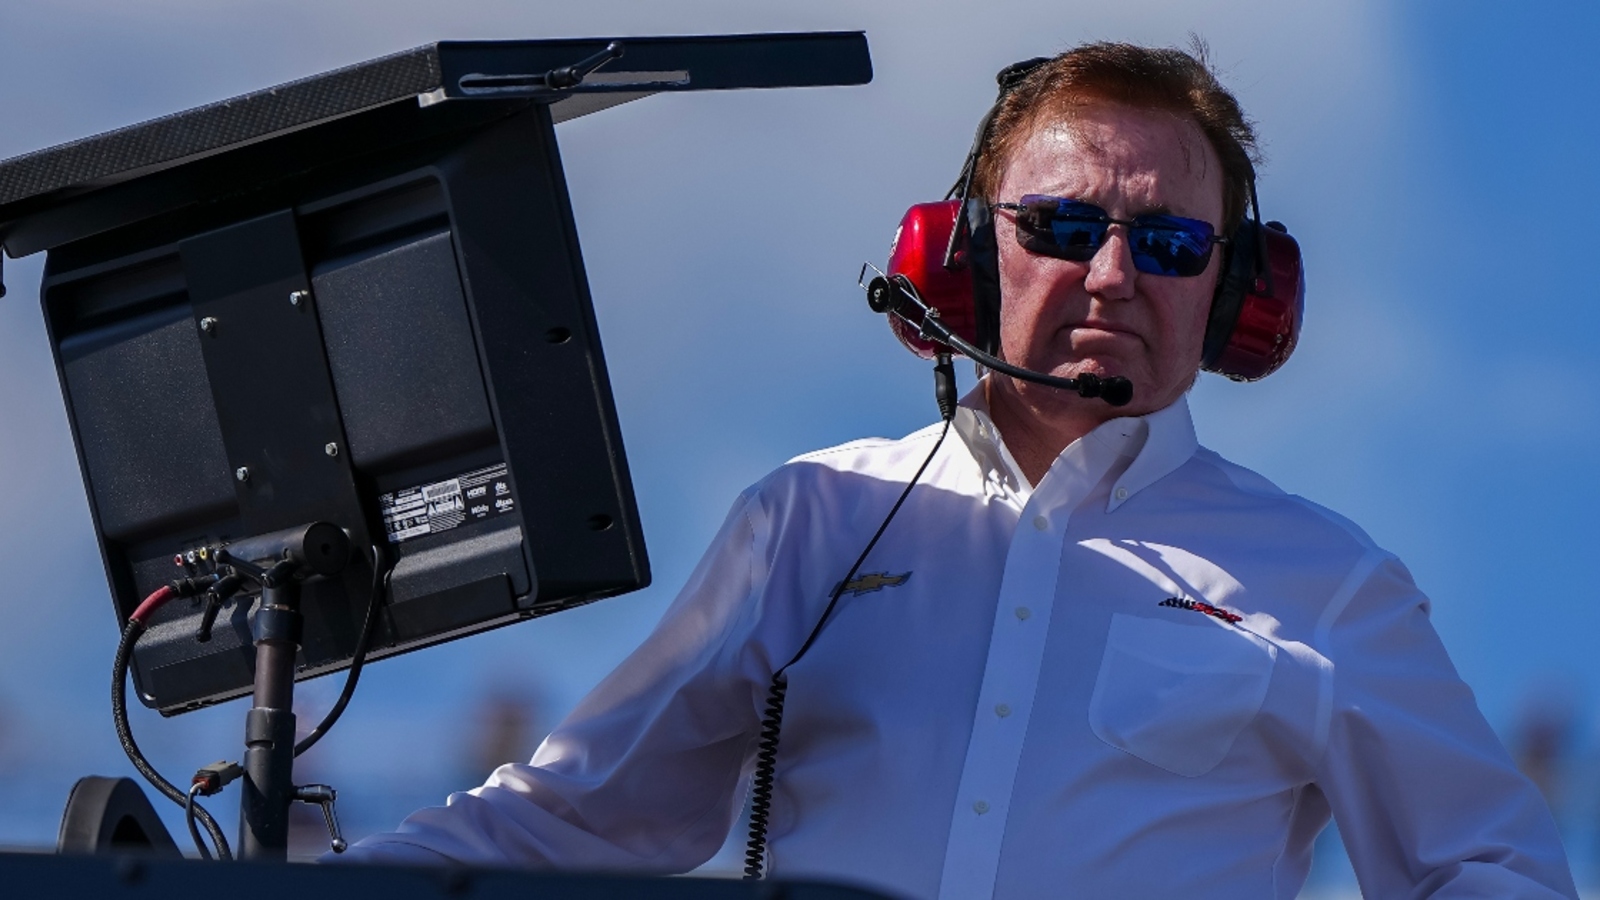 Richard Childress warned NASCAR about extreme tire wear before Food City 500 at Bristol